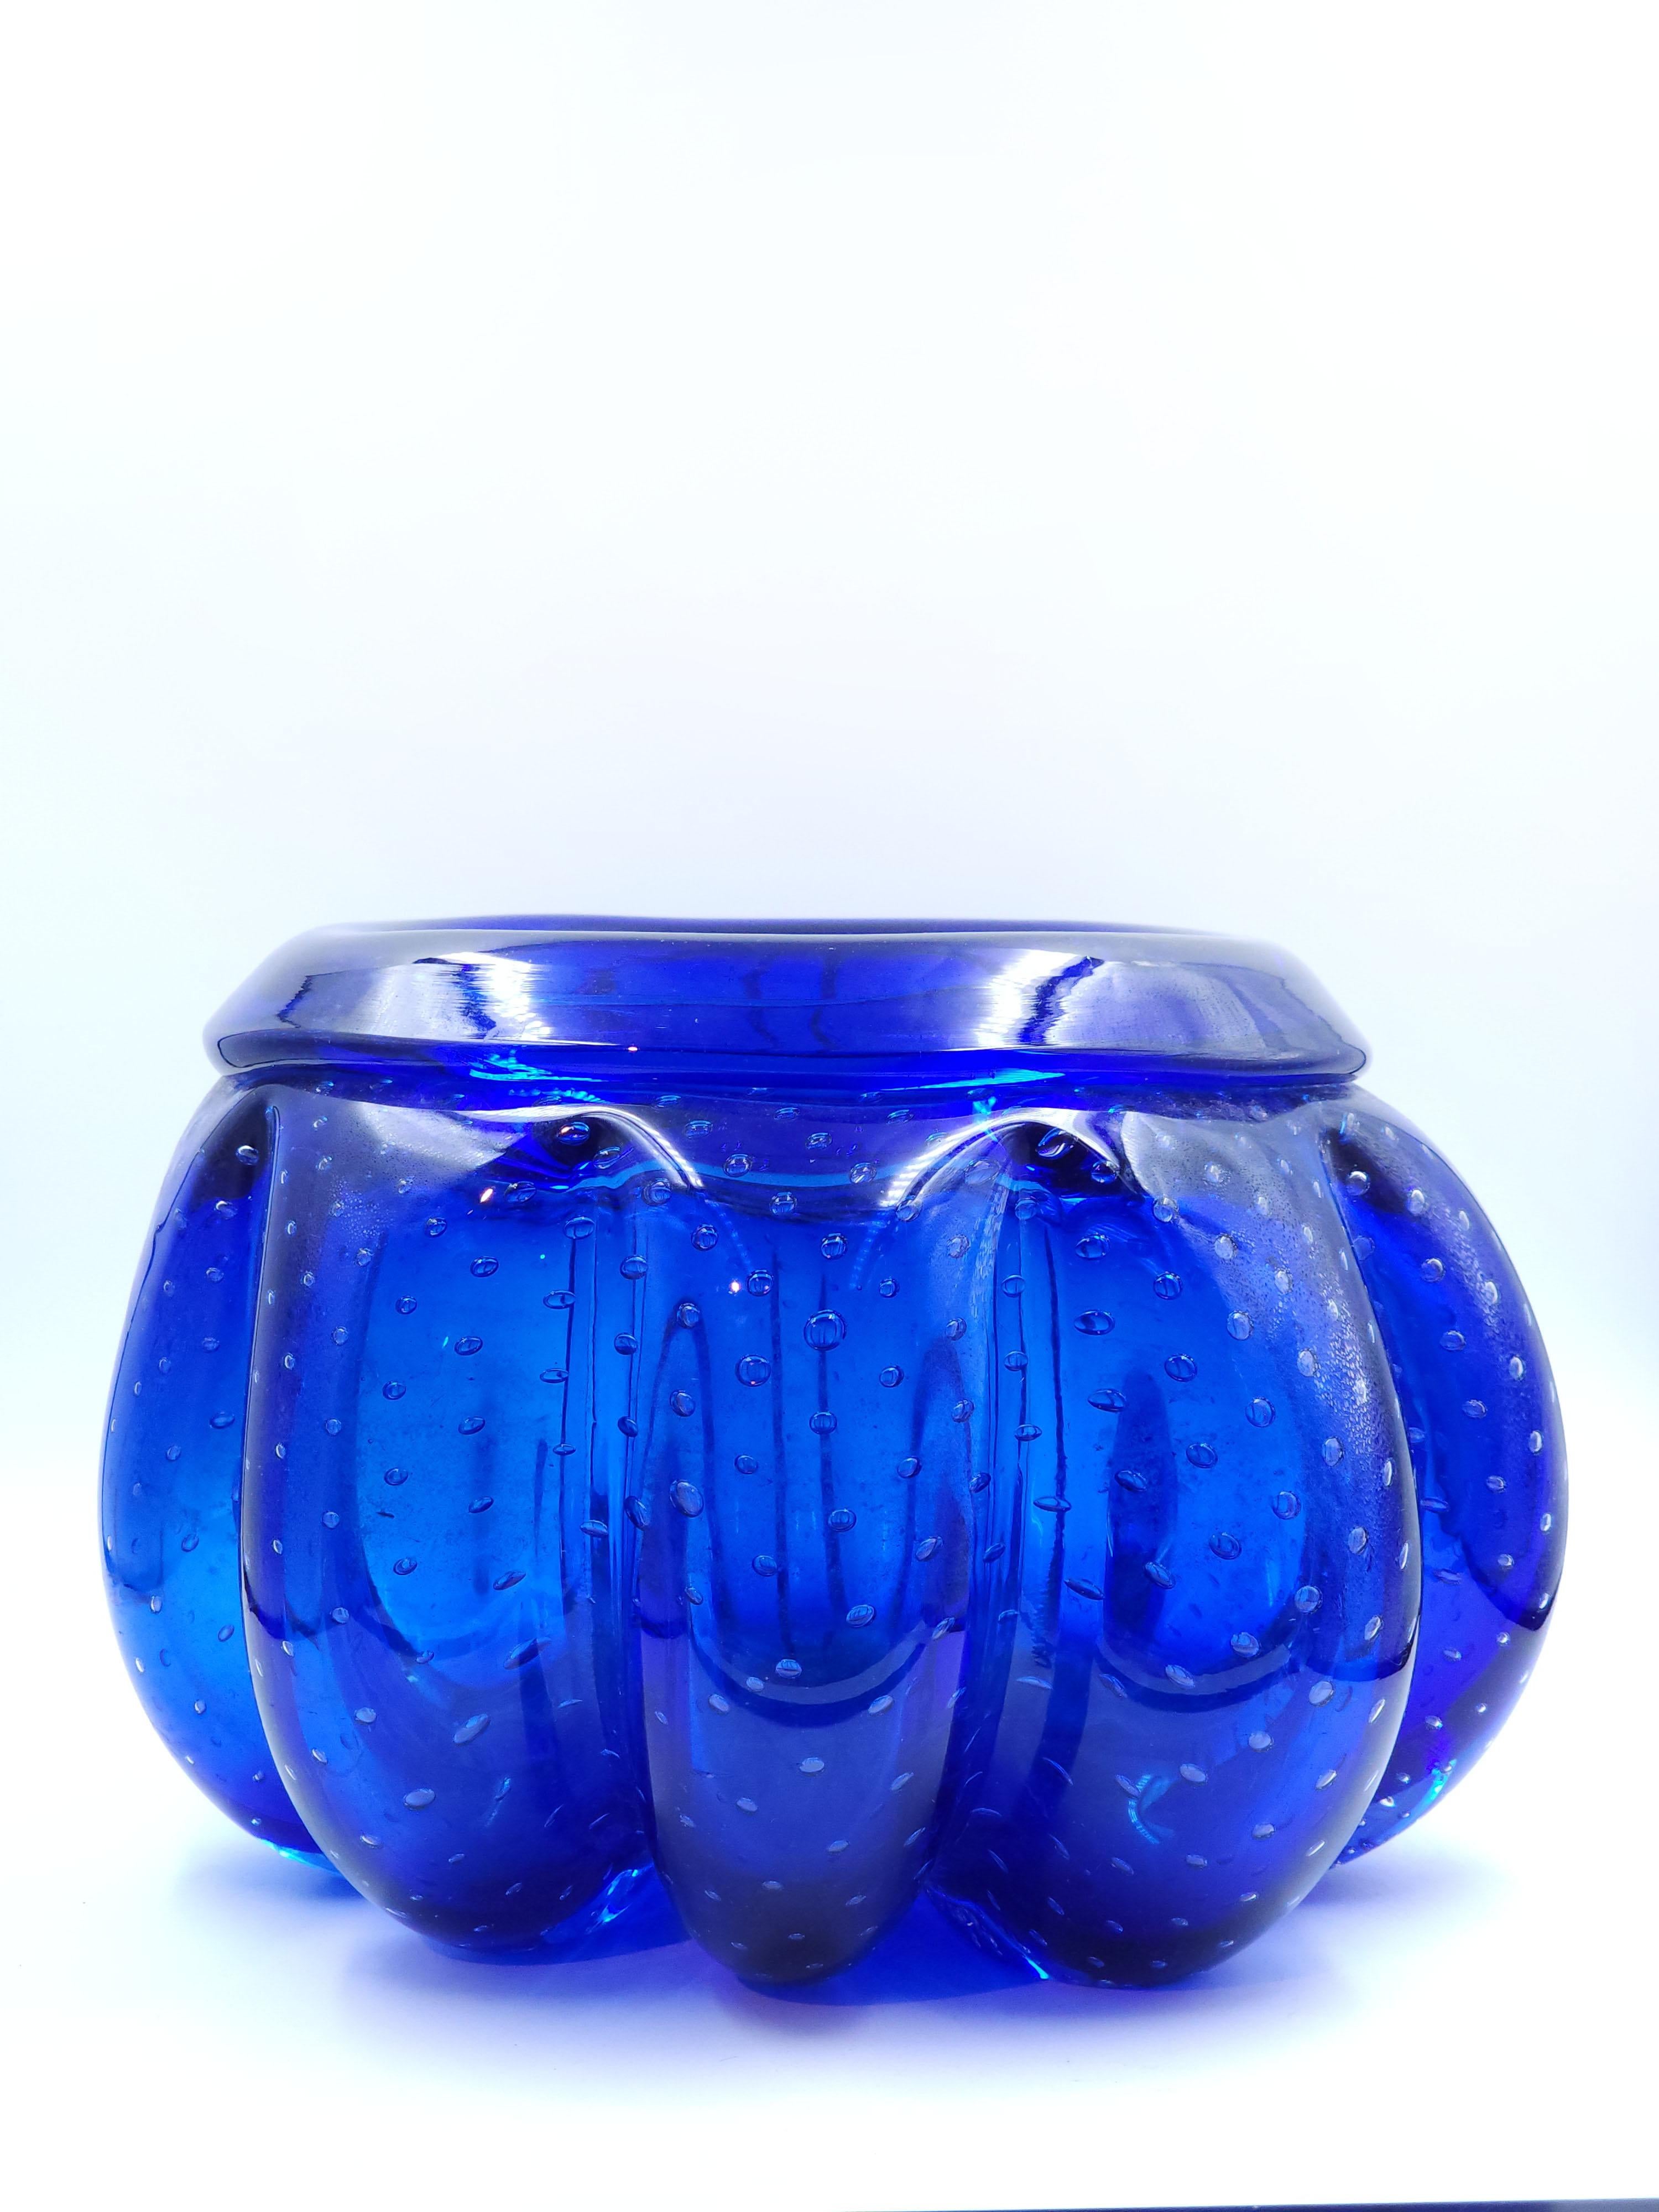 Italian blue Murano art glass center from Seguso, circa 1960
This center has a distinctive design, it has a rounded shape with folds that resemble petals, it has a dreamy pattern that gives it an interesting visual appearance and the blue color is